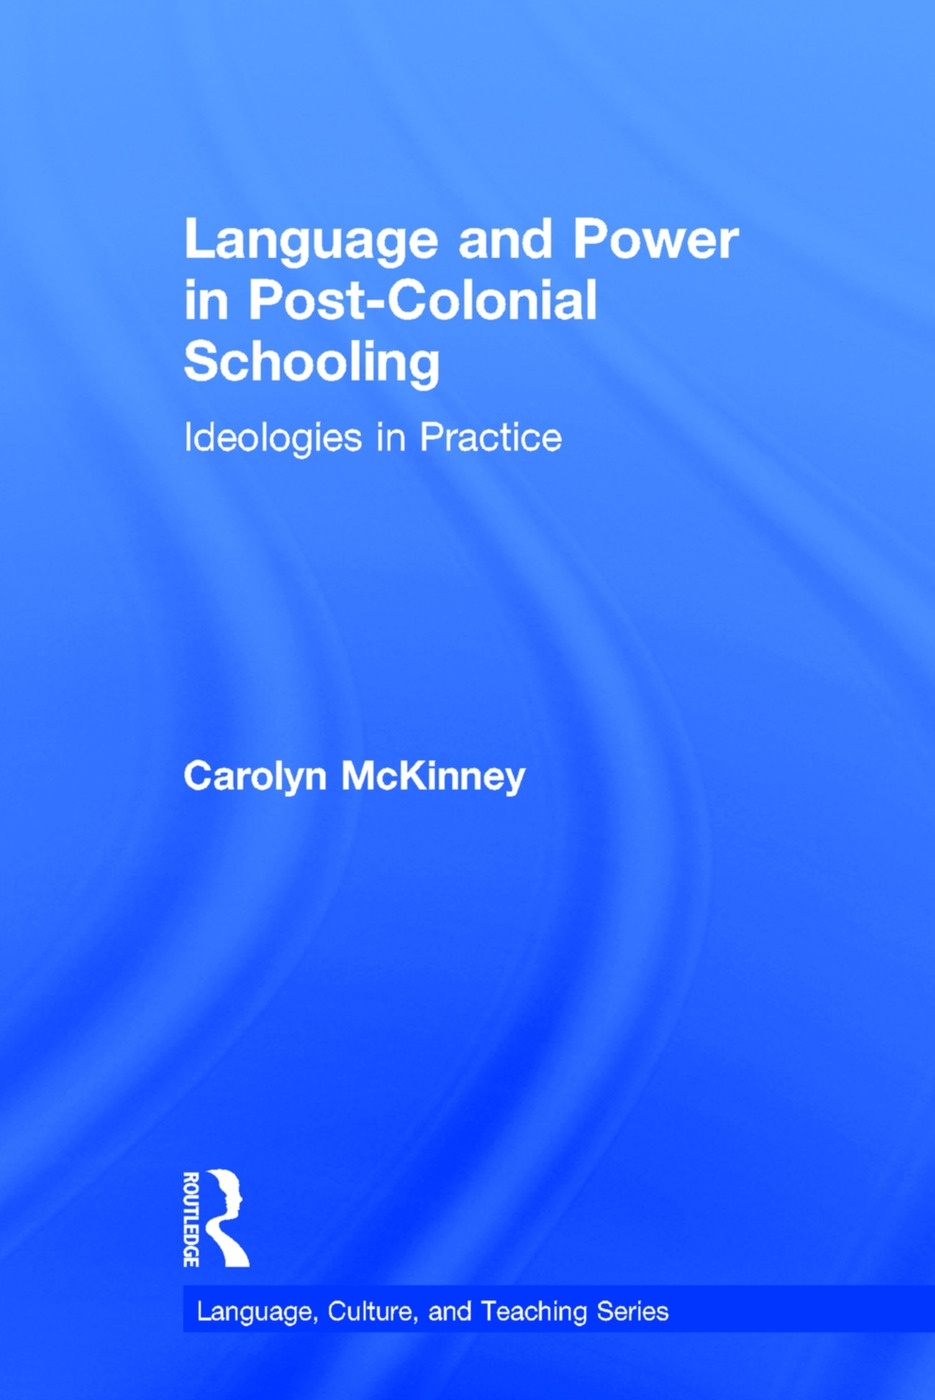 Language and Power in Post-Colonial Schooling: Ideologies in Practice